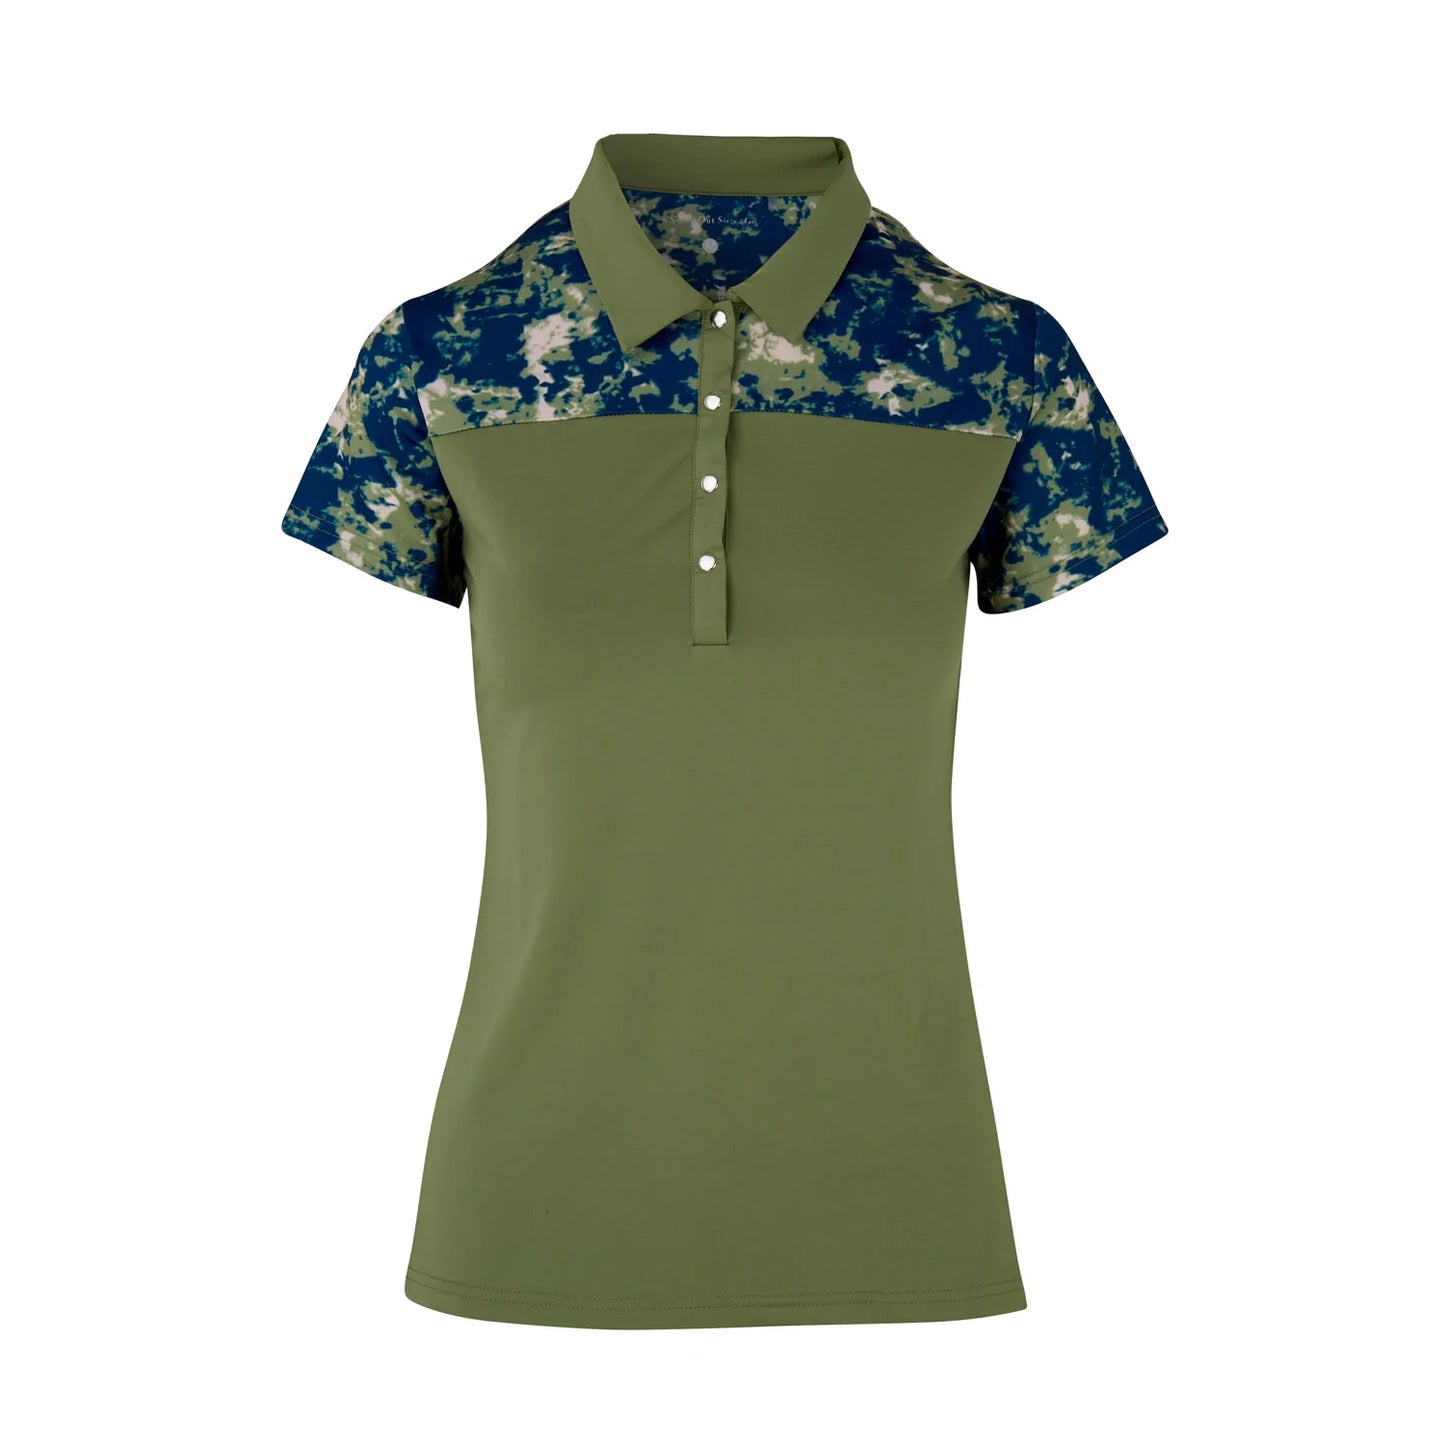 Swing Out Sister Bridgette Cap Sleeve Polo in Olive Green